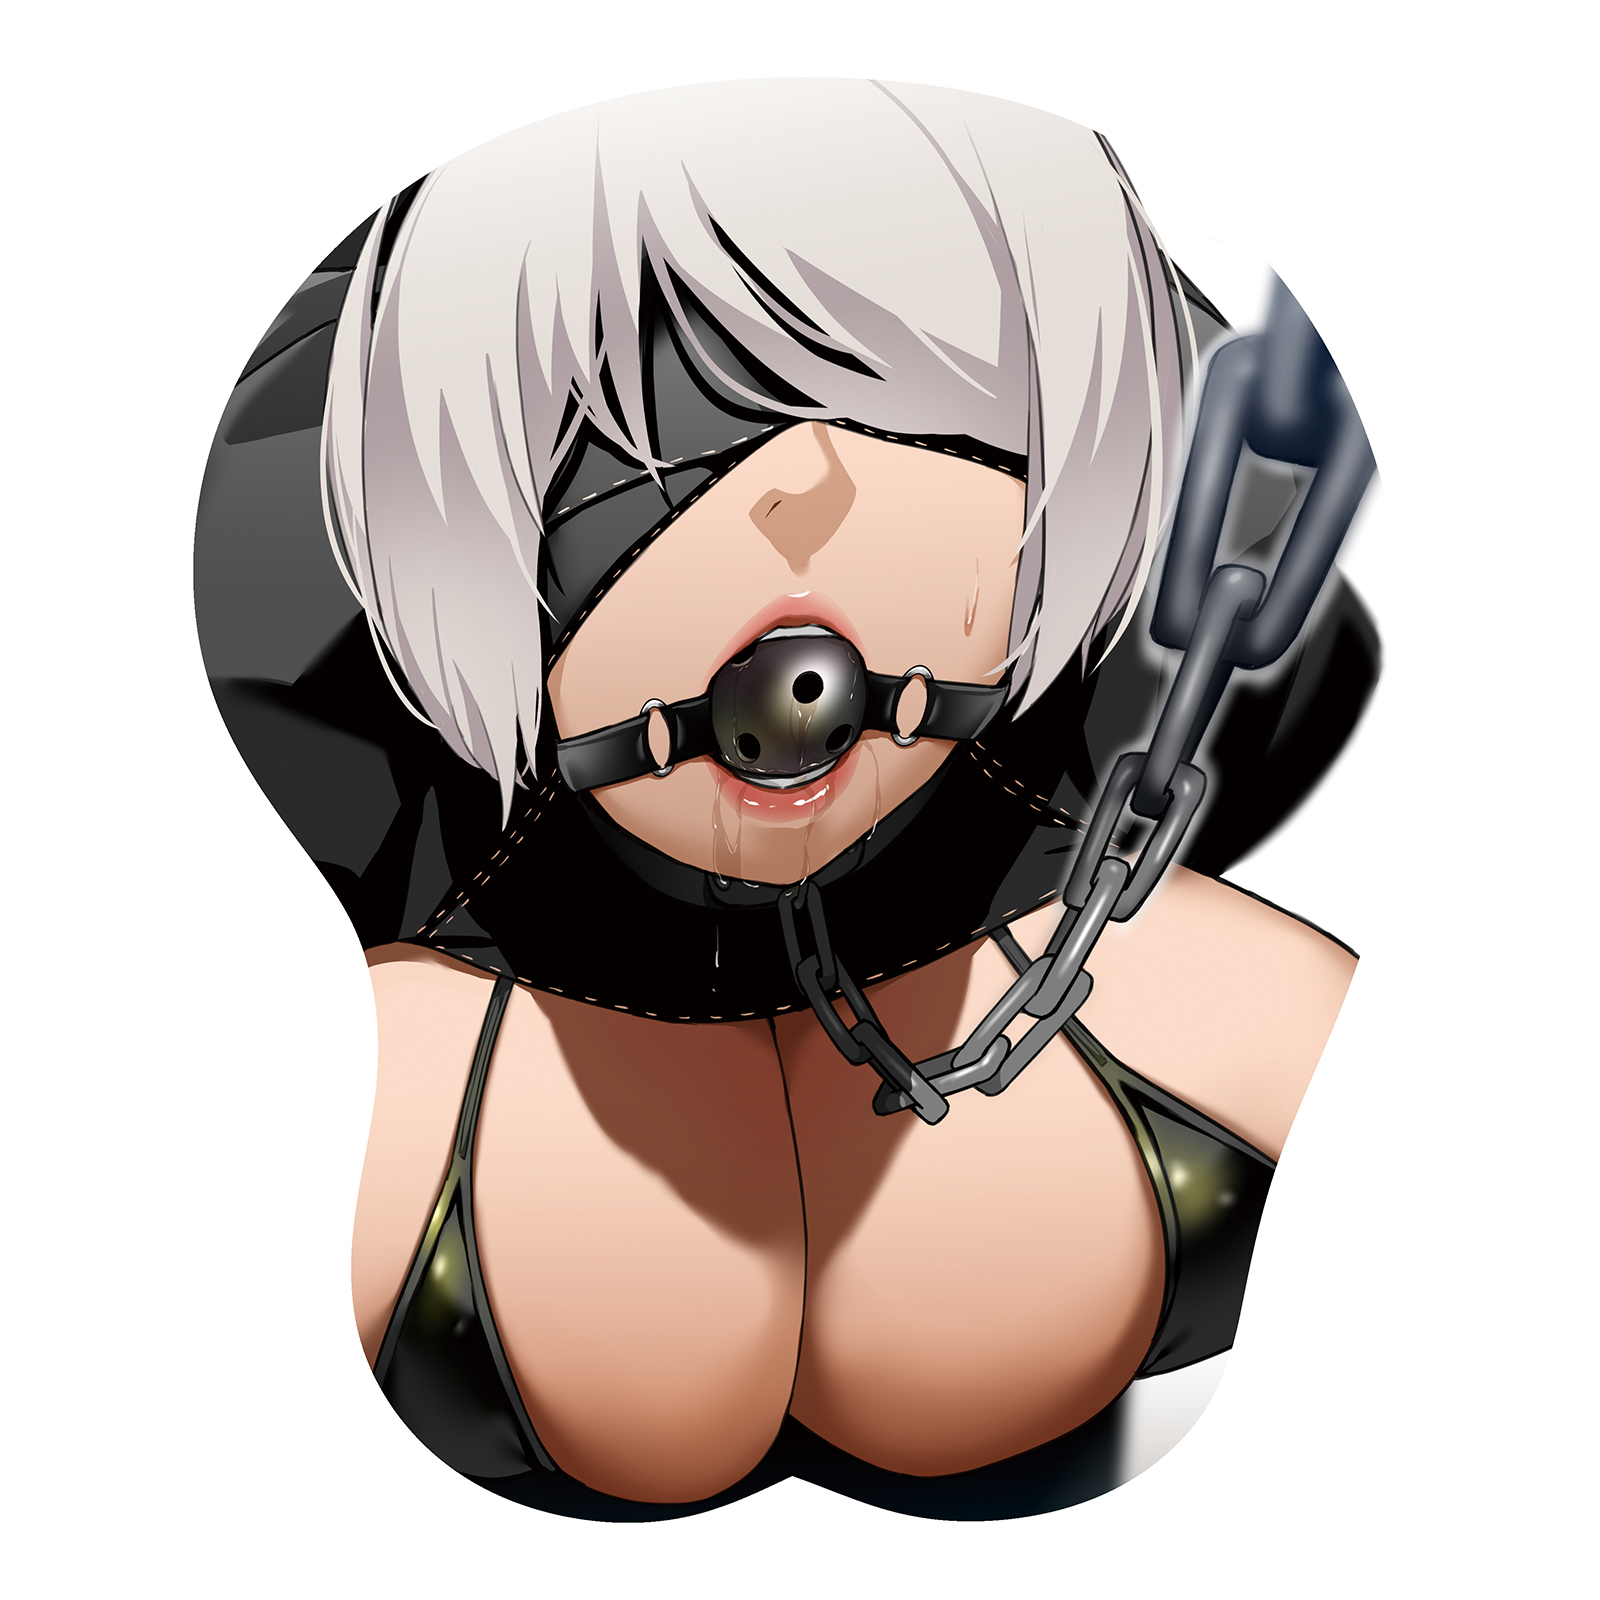 2B Nier Automata Anime 3D Mouse Pads Soft Breast Sexy Butt Wrist Rest Oppai